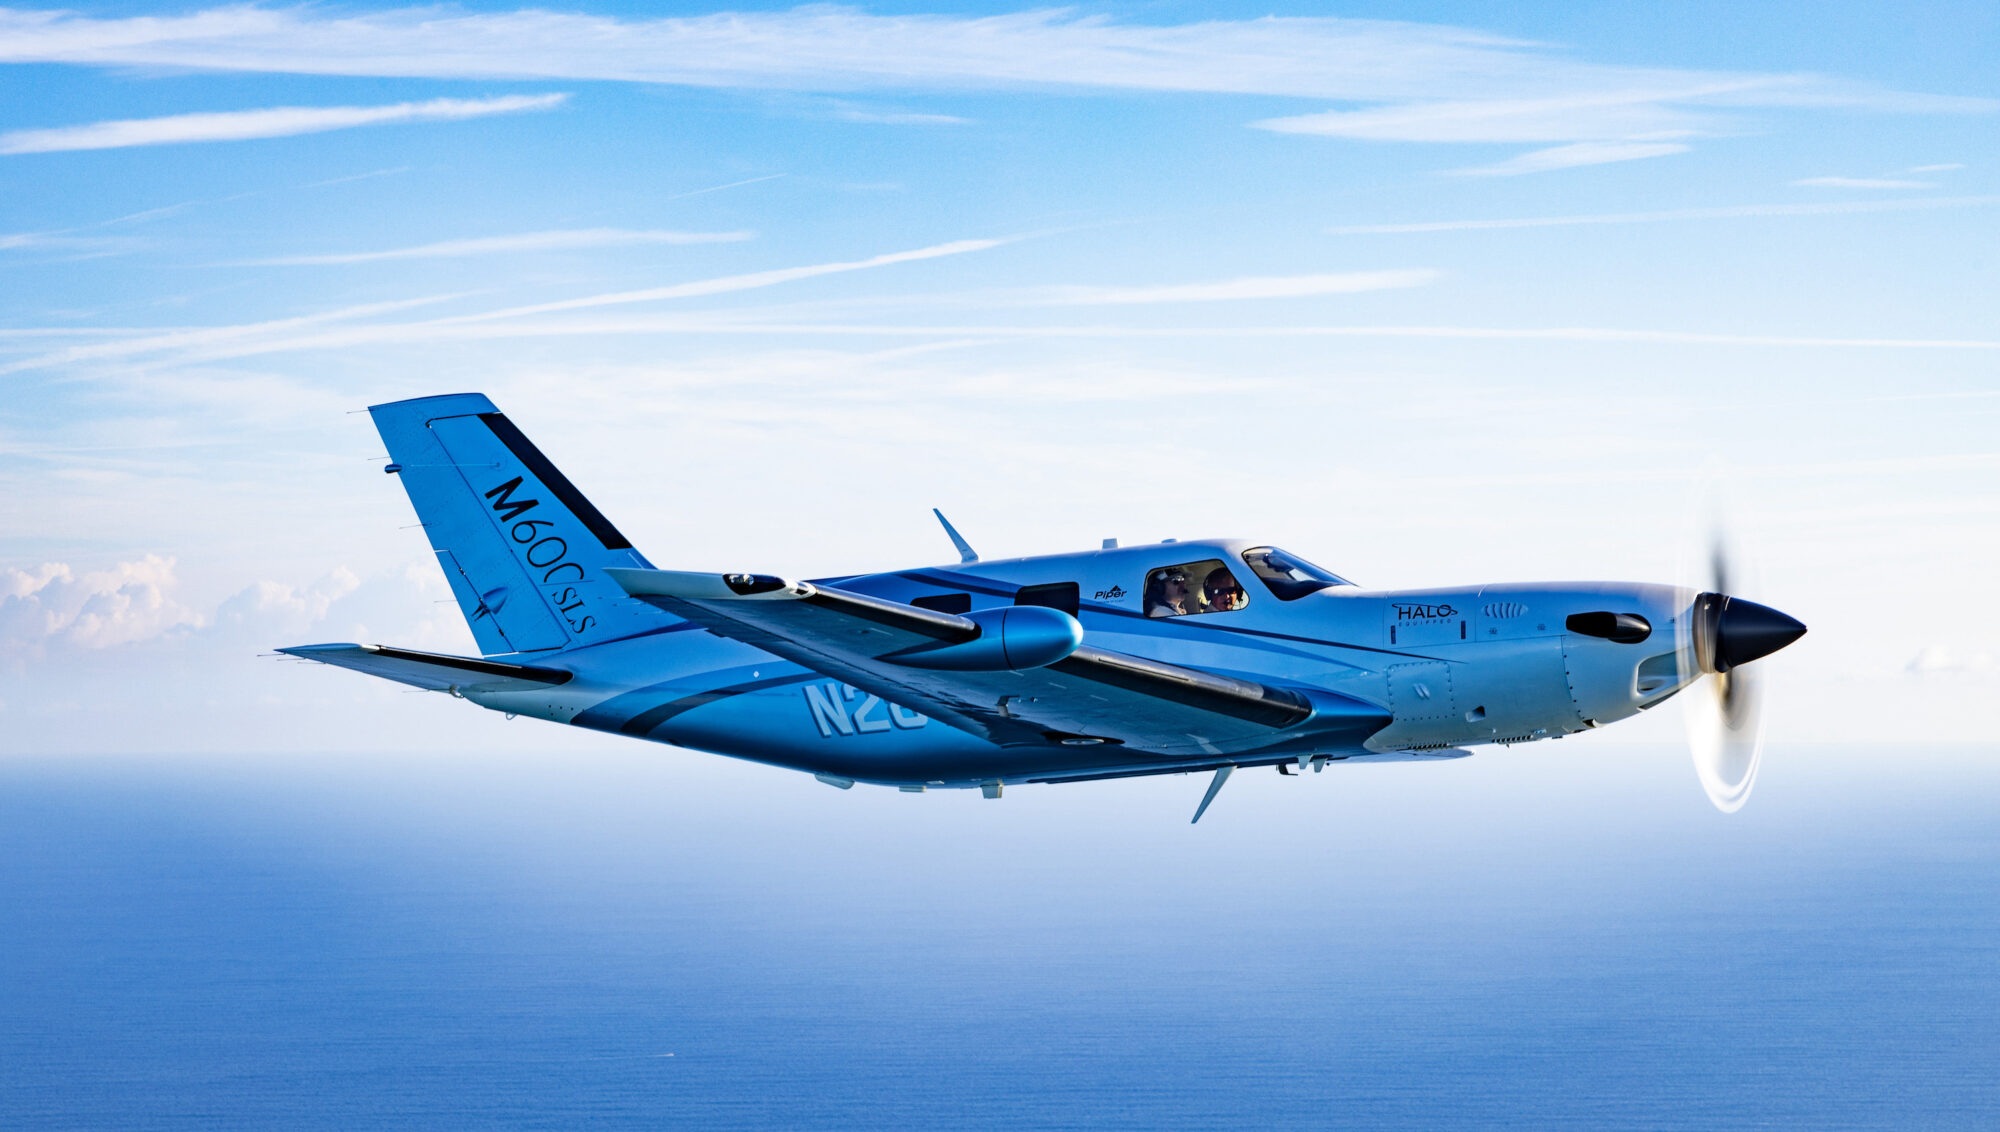 Piper Aircraft M600 flying through the sky